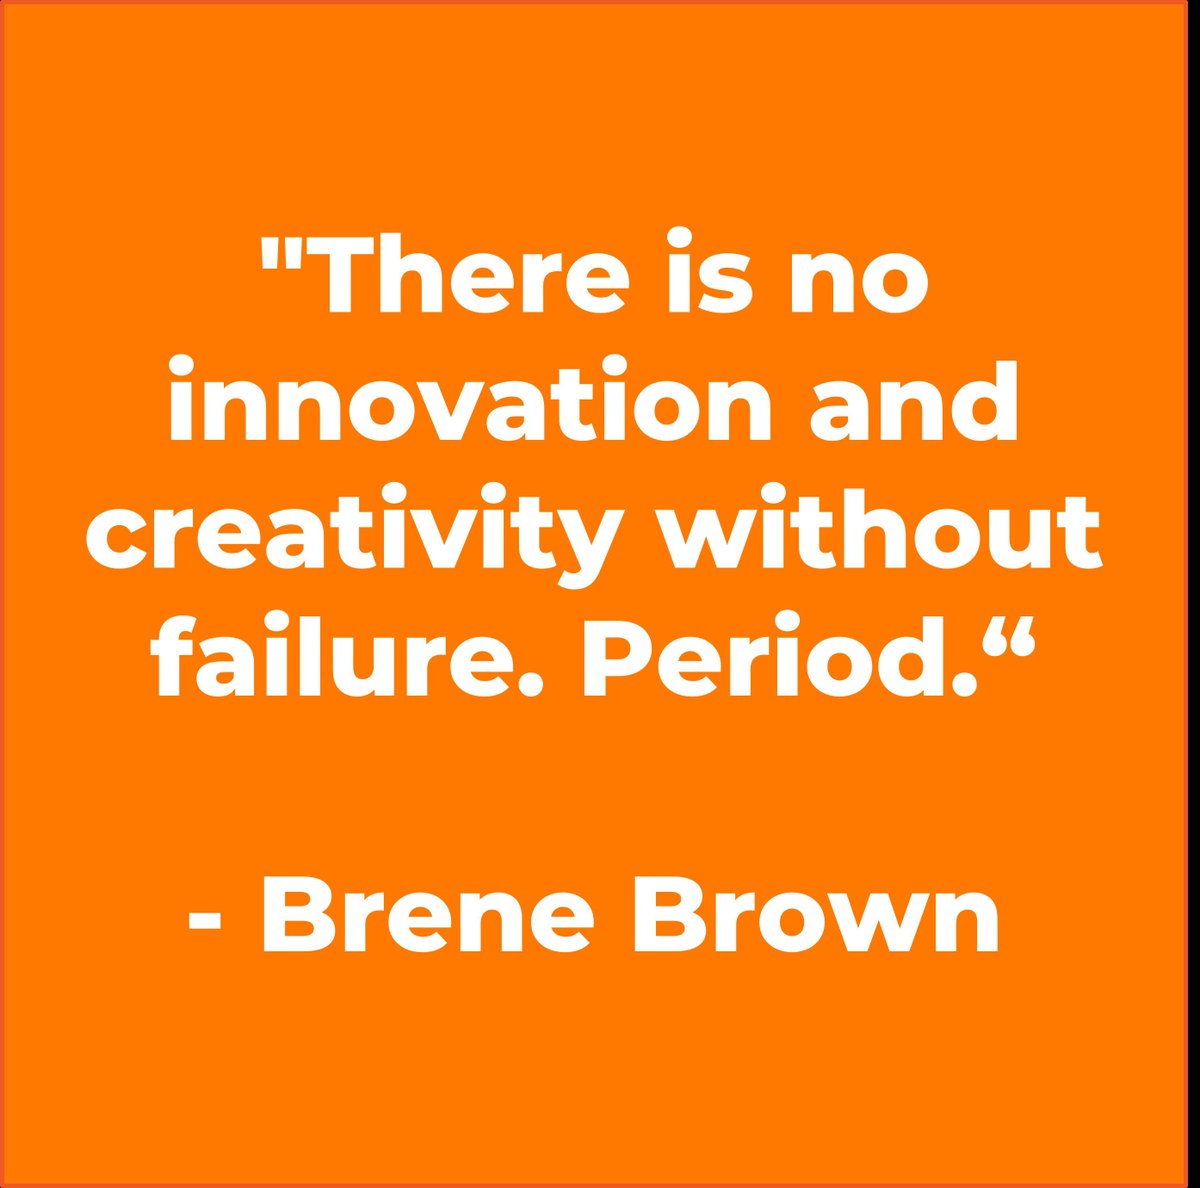 Embrace failure to fuel your vision! Taking risks & learning from setbacks is the engine of #business creativity. #entrepreneur #growthmindset #inspiration #EOS  #failwins #BreneBrown